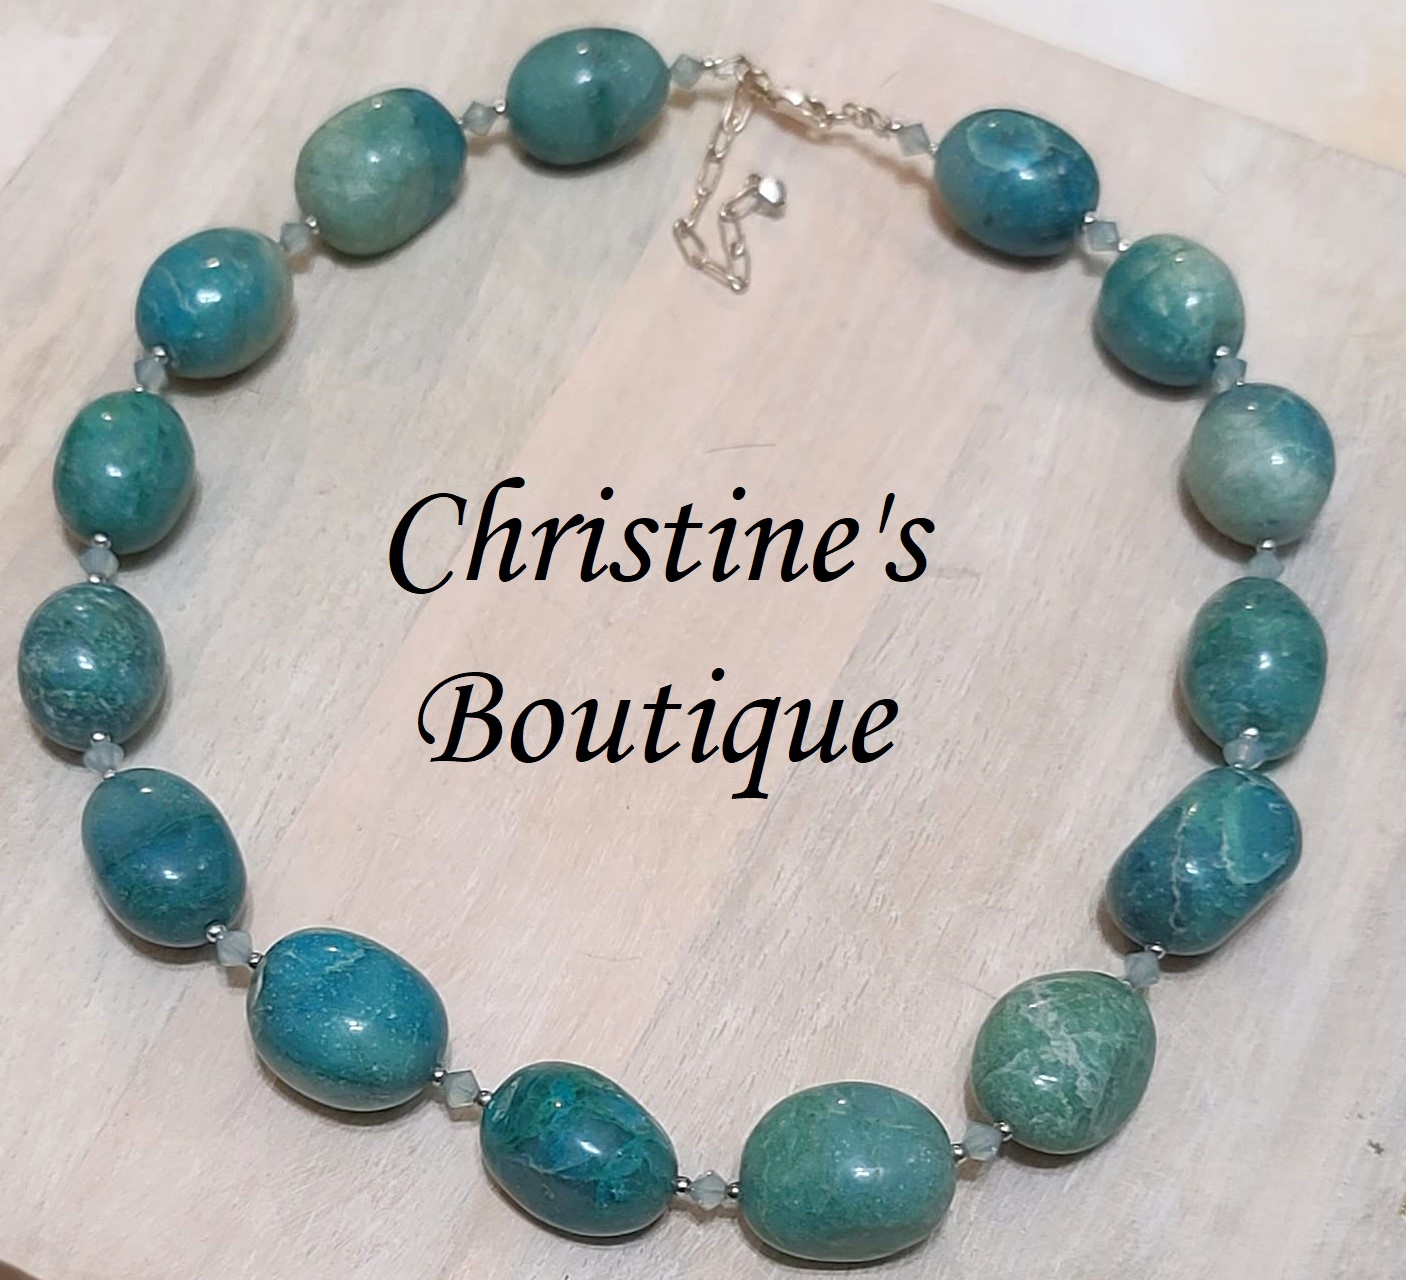 Chrysocolla Gemstone and Crystal Necklace w/Sterling Silver